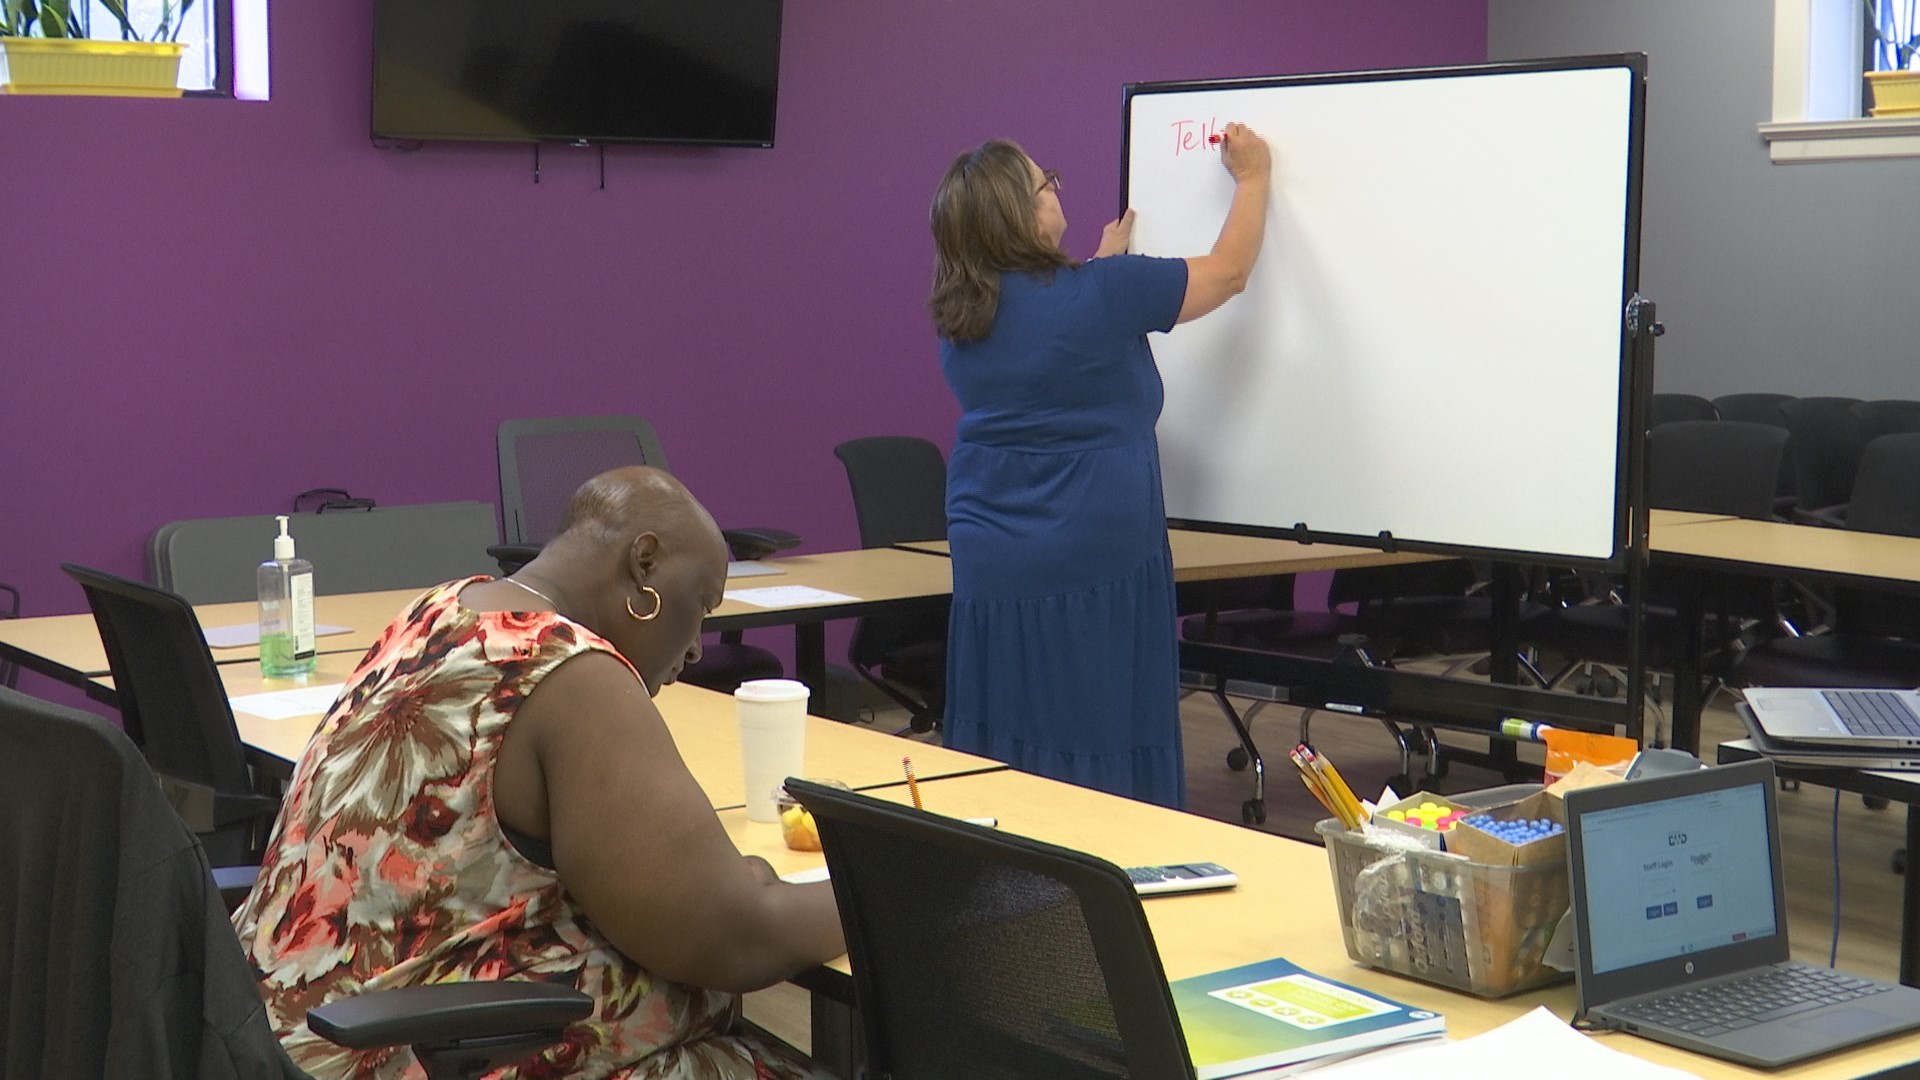 Through a partnership with MSD of Warren Township, the Damien Center hosts adult education classes on Tuesdays and Thursdays from 9 a.m. to 12:15 p.m.